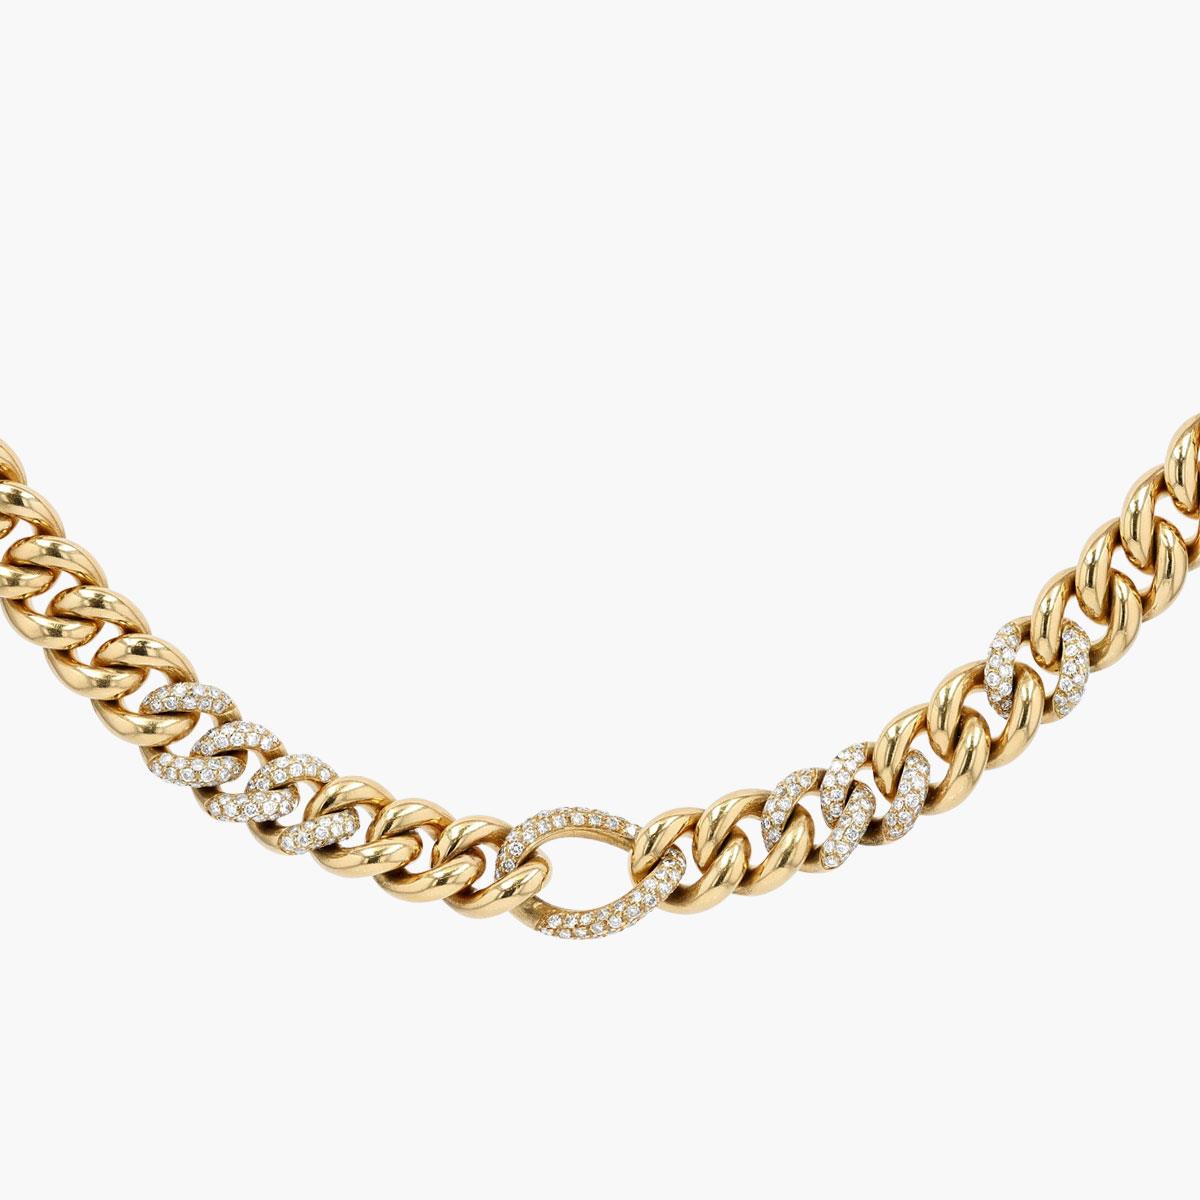 Vintage 18K Yellow Gold Curb Link Necklace With Diamonds